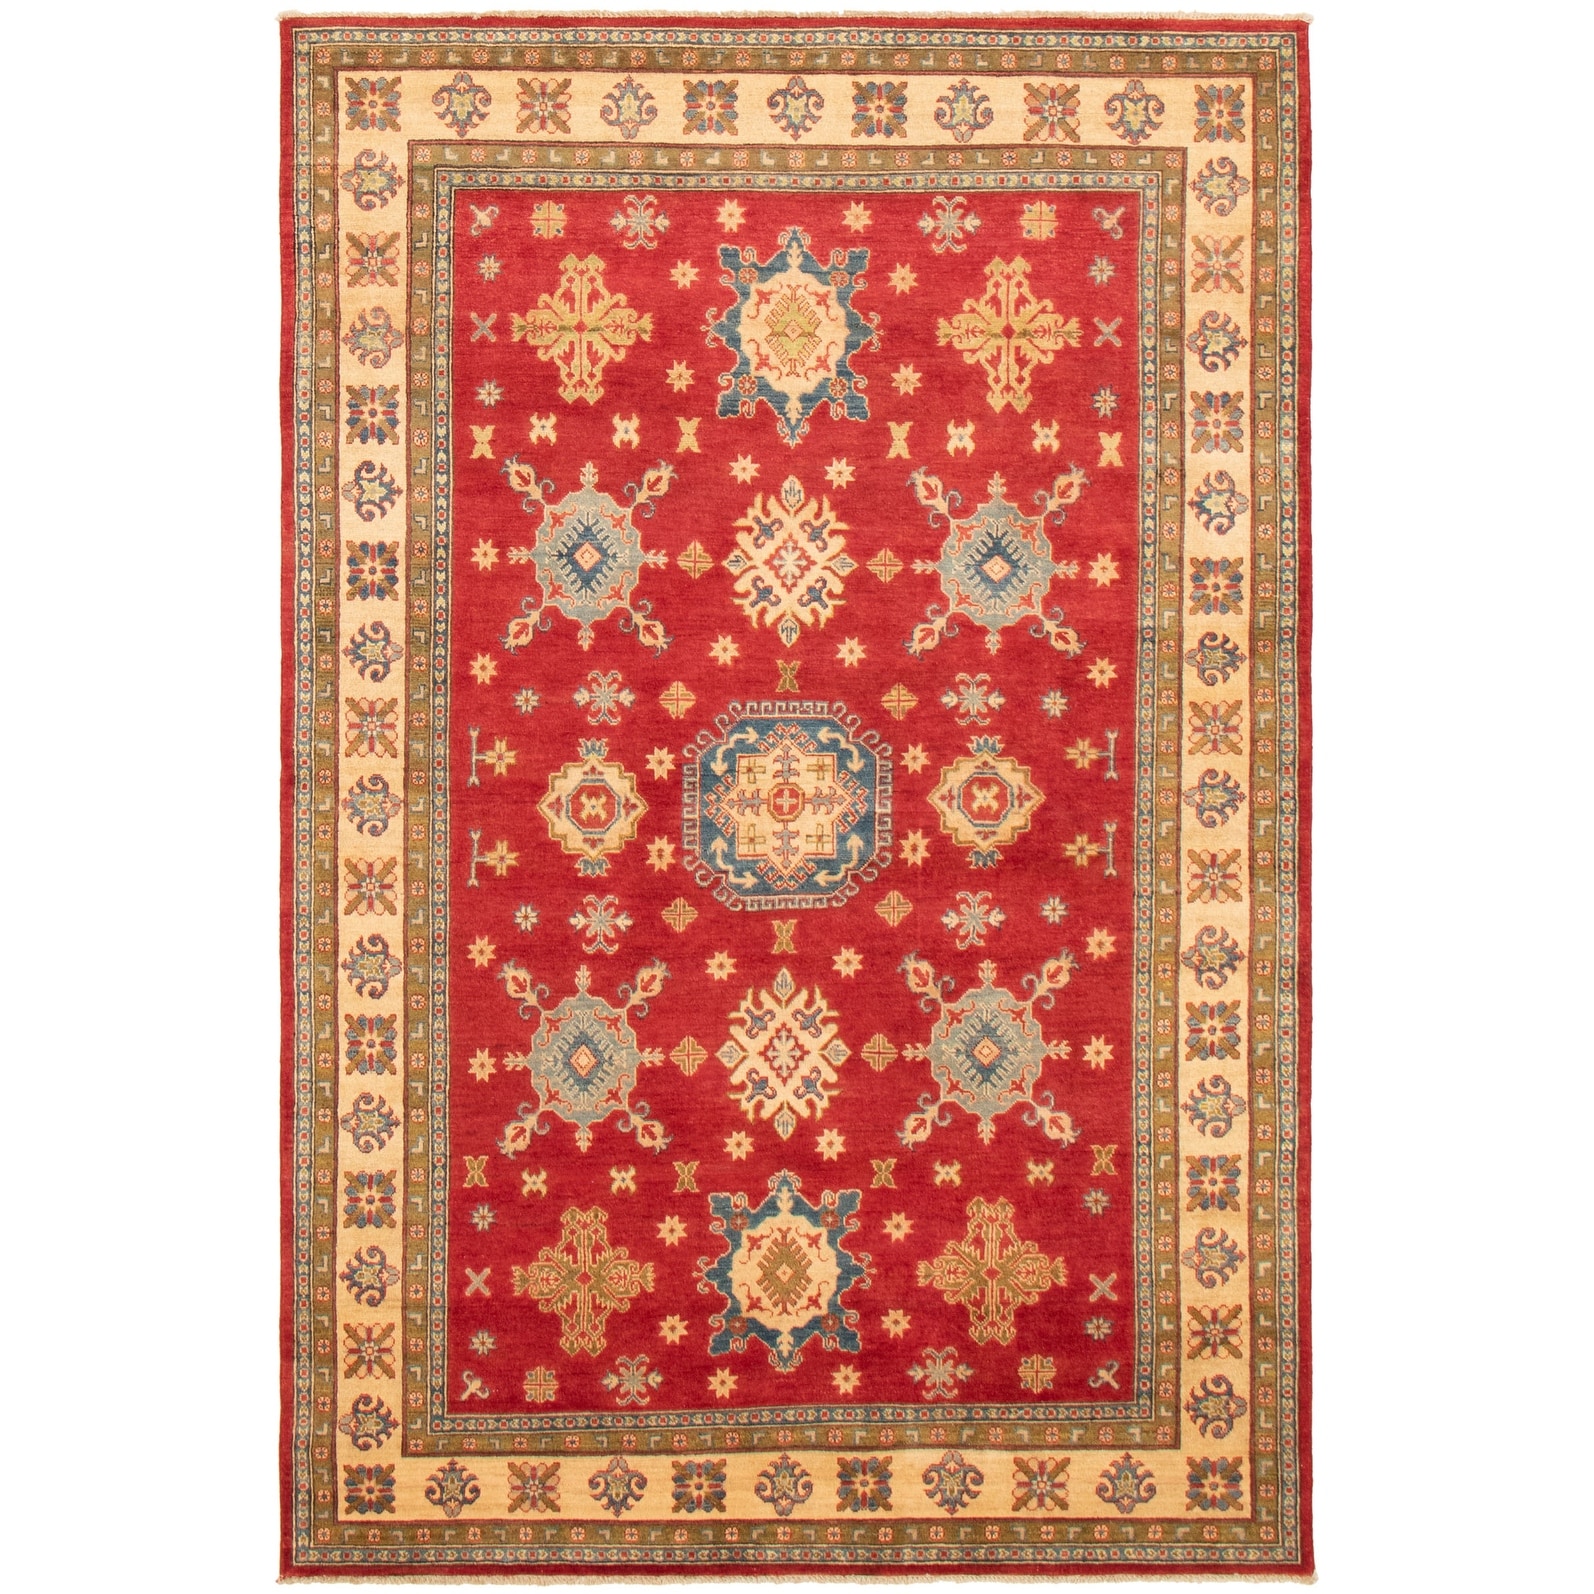 Bedroom eCarpet Gallery Area Rug for Living Room Bold and Colorful Bordered Red Kilim 4'2 x 6'6 Hand-Knotted Wool Rug 346280 